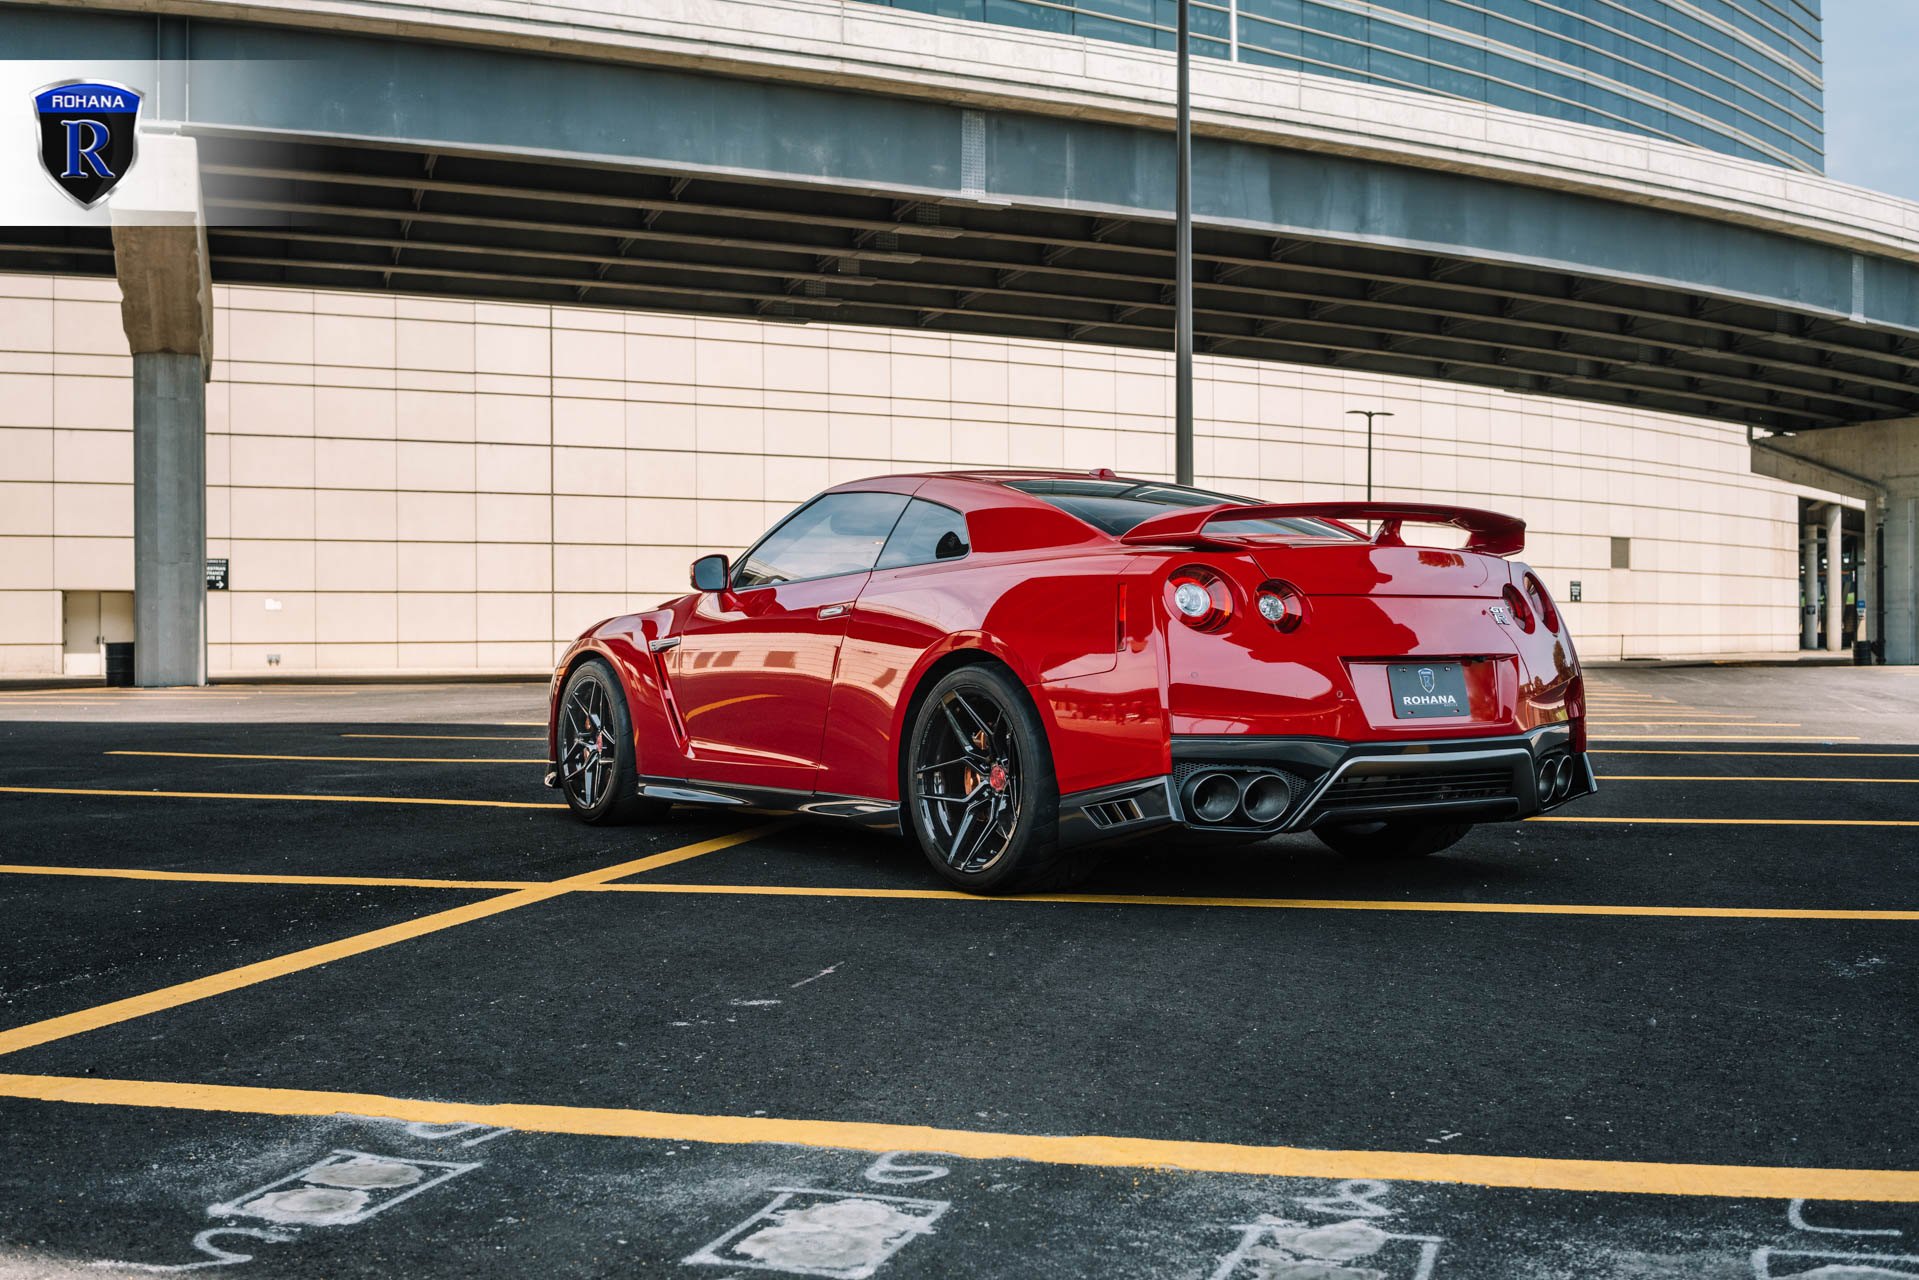 Red Nissan GT-R with Aftermarket Rear Diffuser - Photo by Rohana Wheels